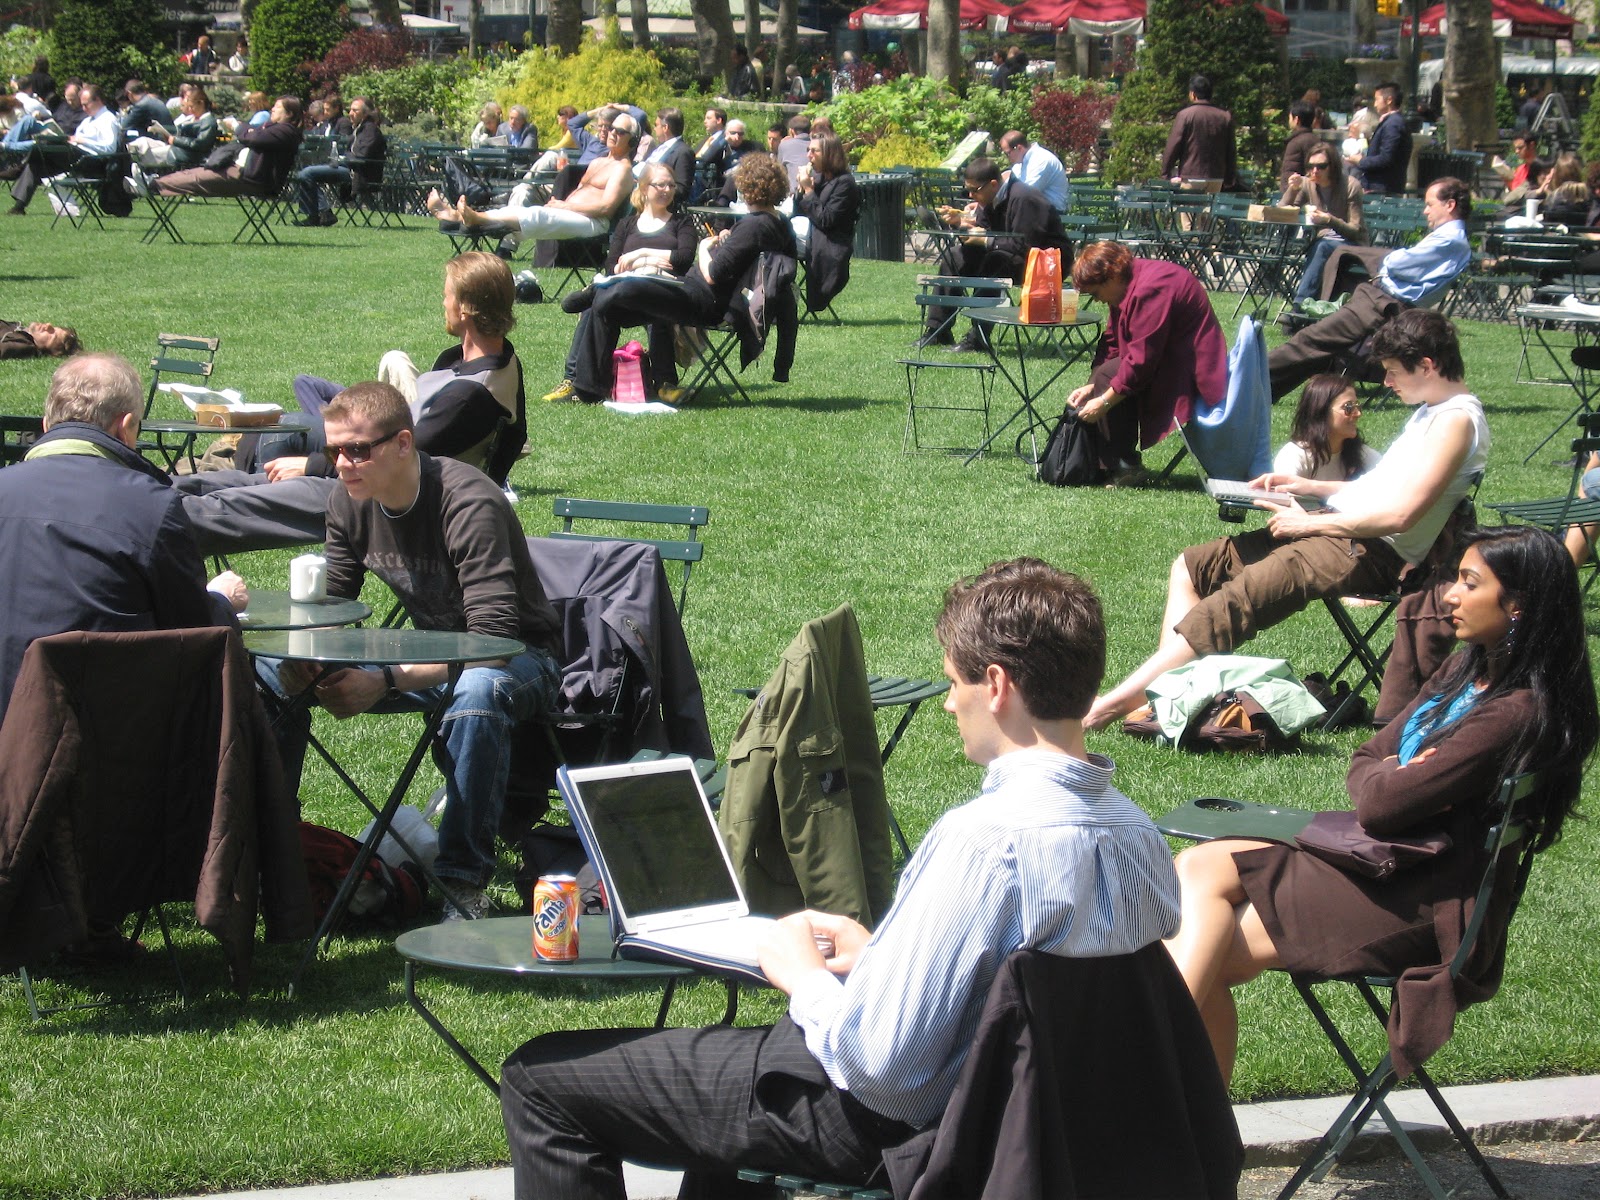 Bryant Park in New York City has offered free wifi to the public since 2002.